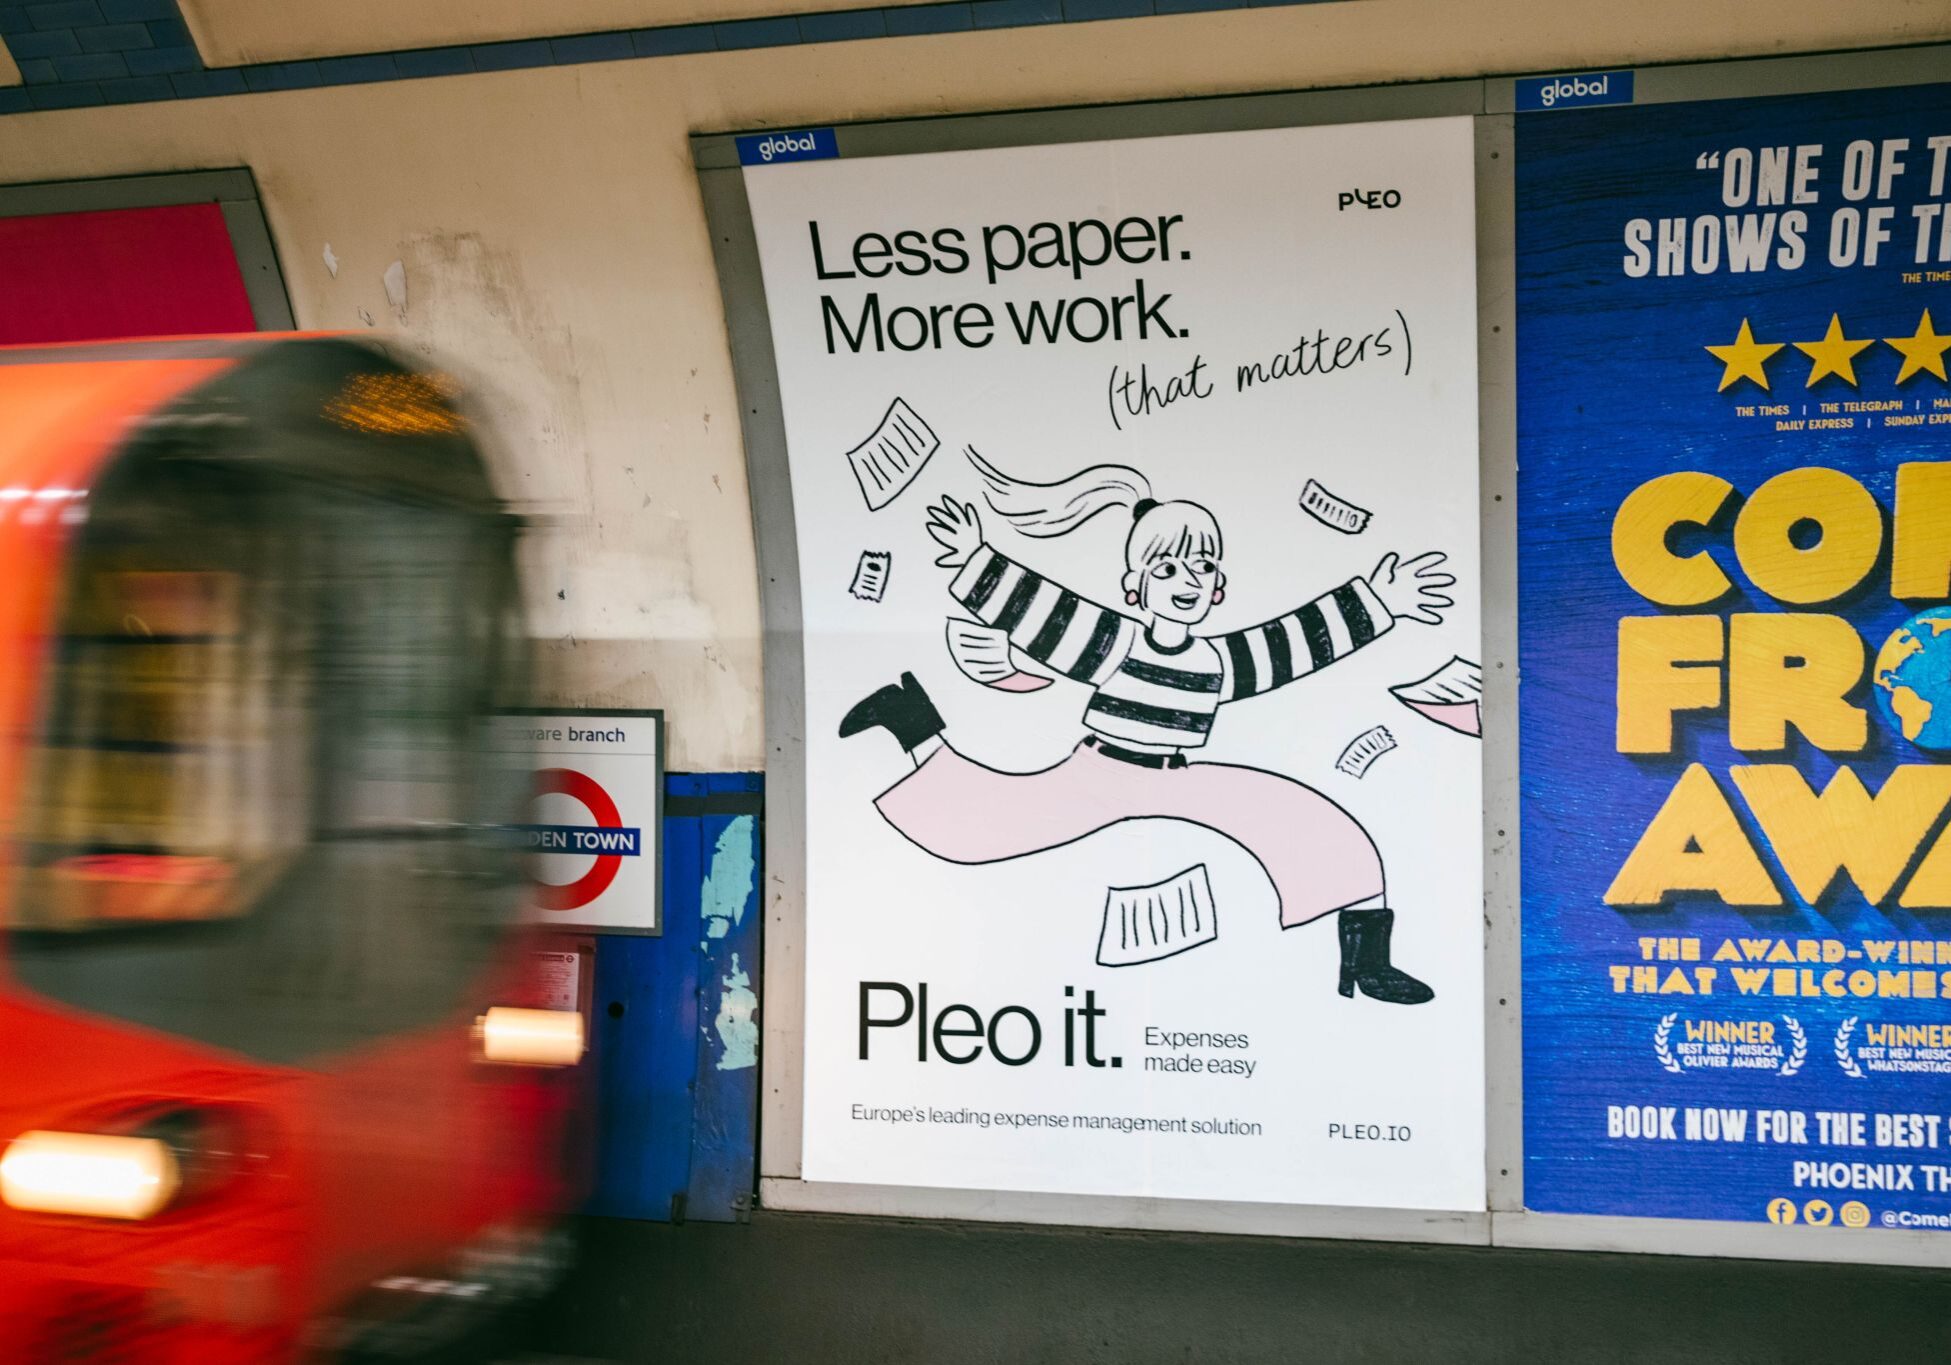 An advert for Pleo using 16-sheet advertising, across the track, on the London Underground. A tube car is blurred as it rushes past.